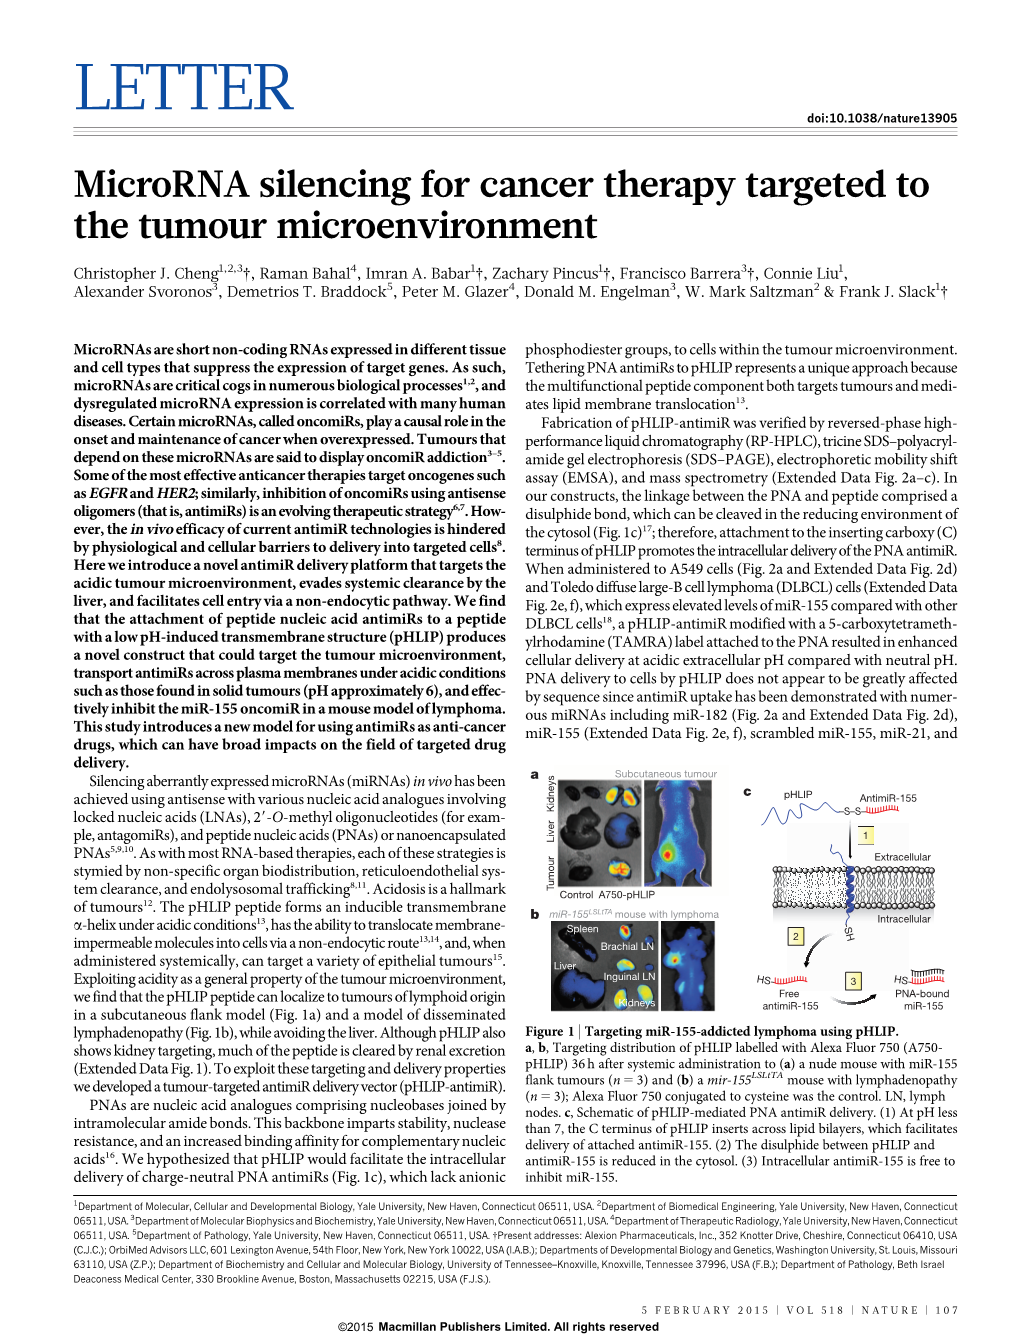 Microrna Silencing for Cancer Therapy Targeted to the Tumour Microenvironment